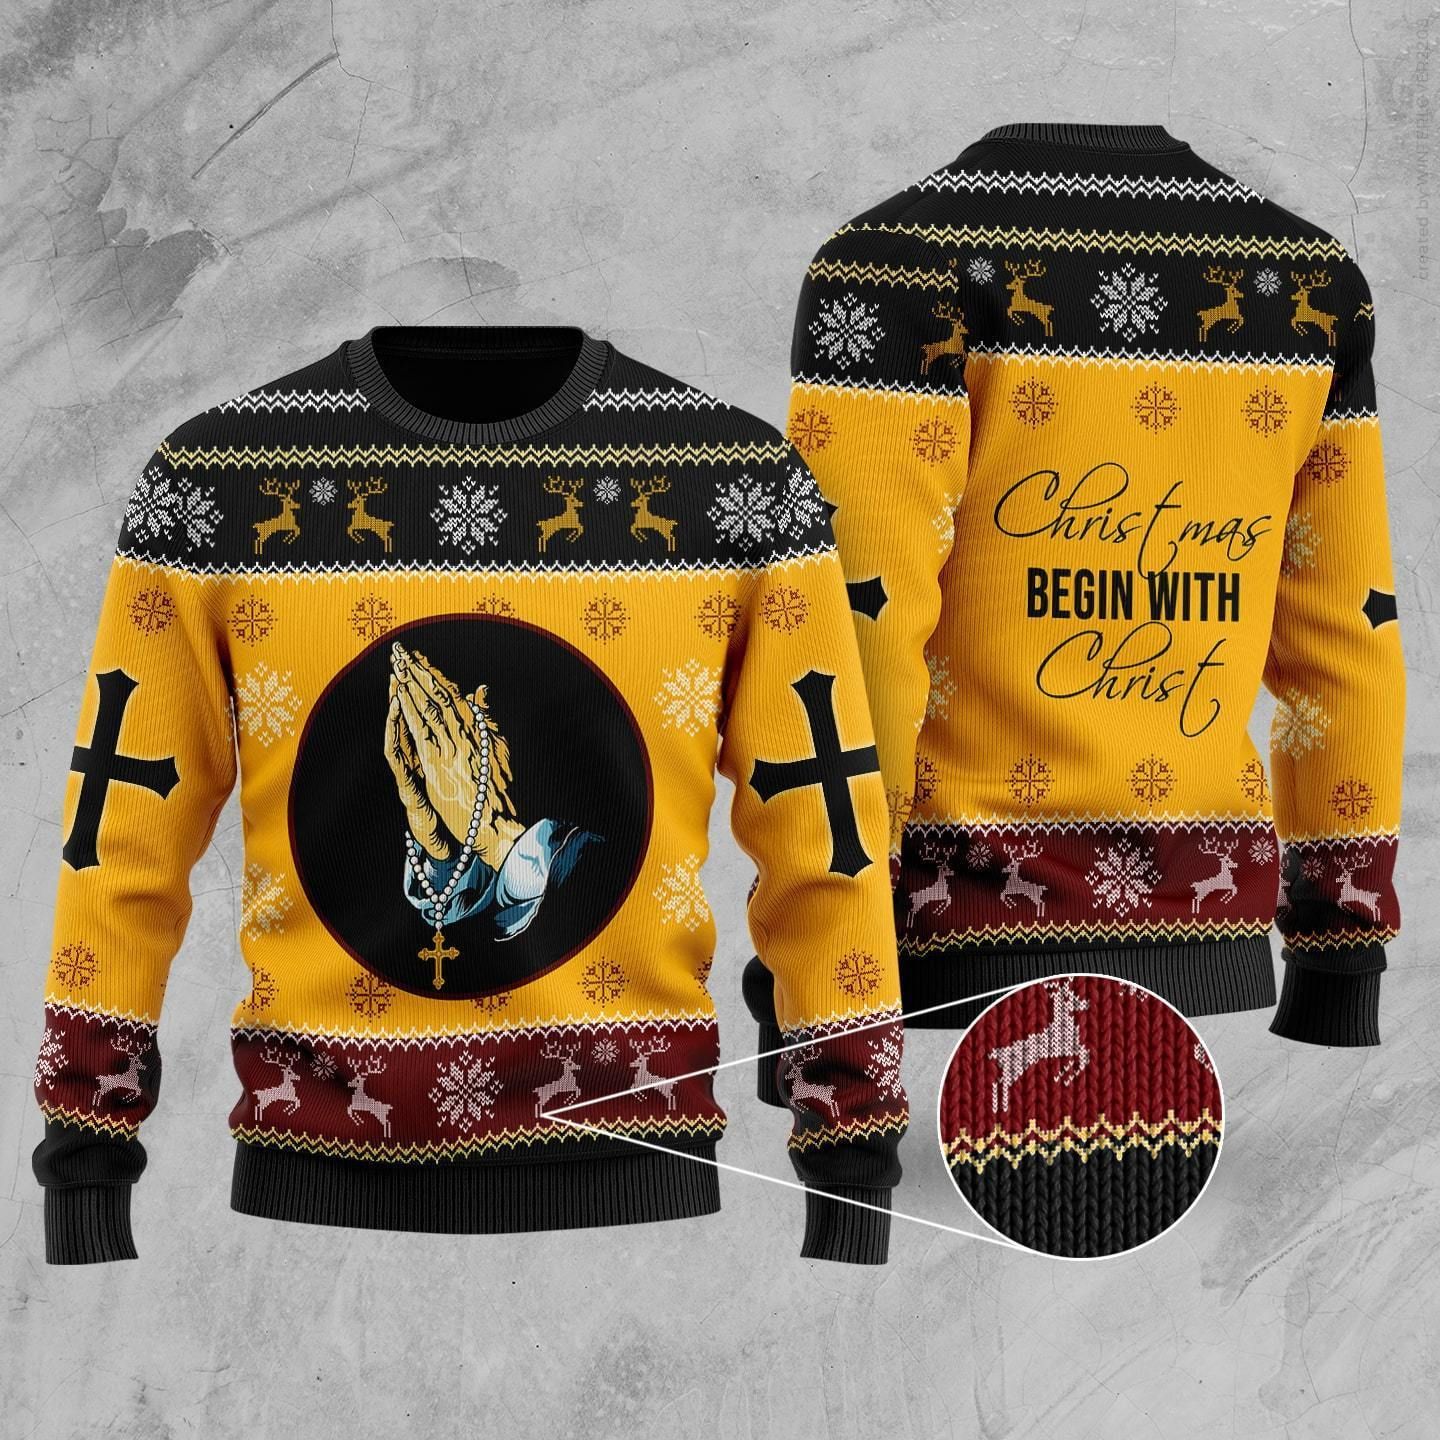 Christmas Begins With Christ Sweater